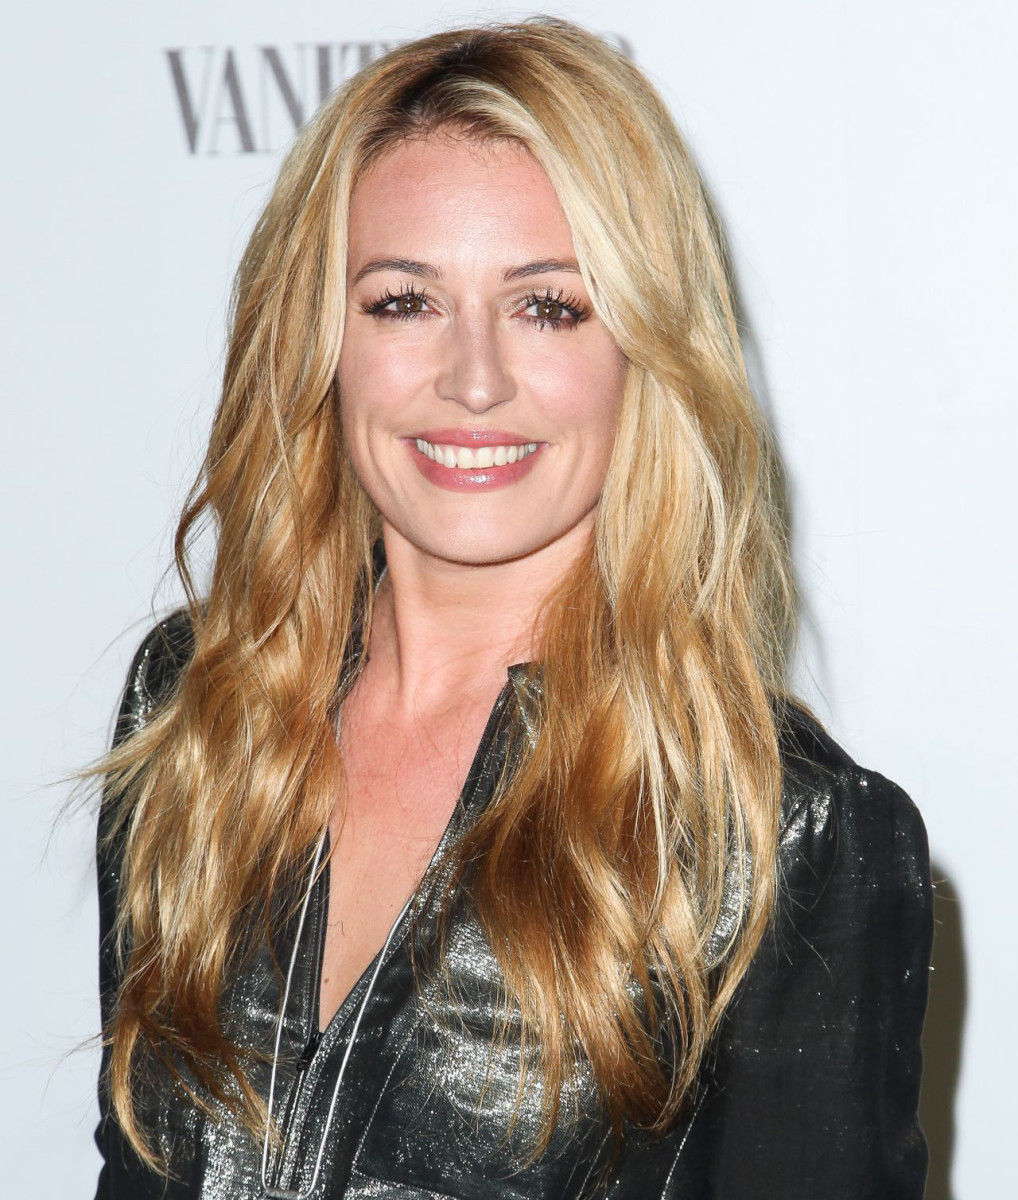 Cat Deeley set her hair on fire_but not at the Vanity Fair and Fiat Celebration of Young Hollywood_Feb 2015